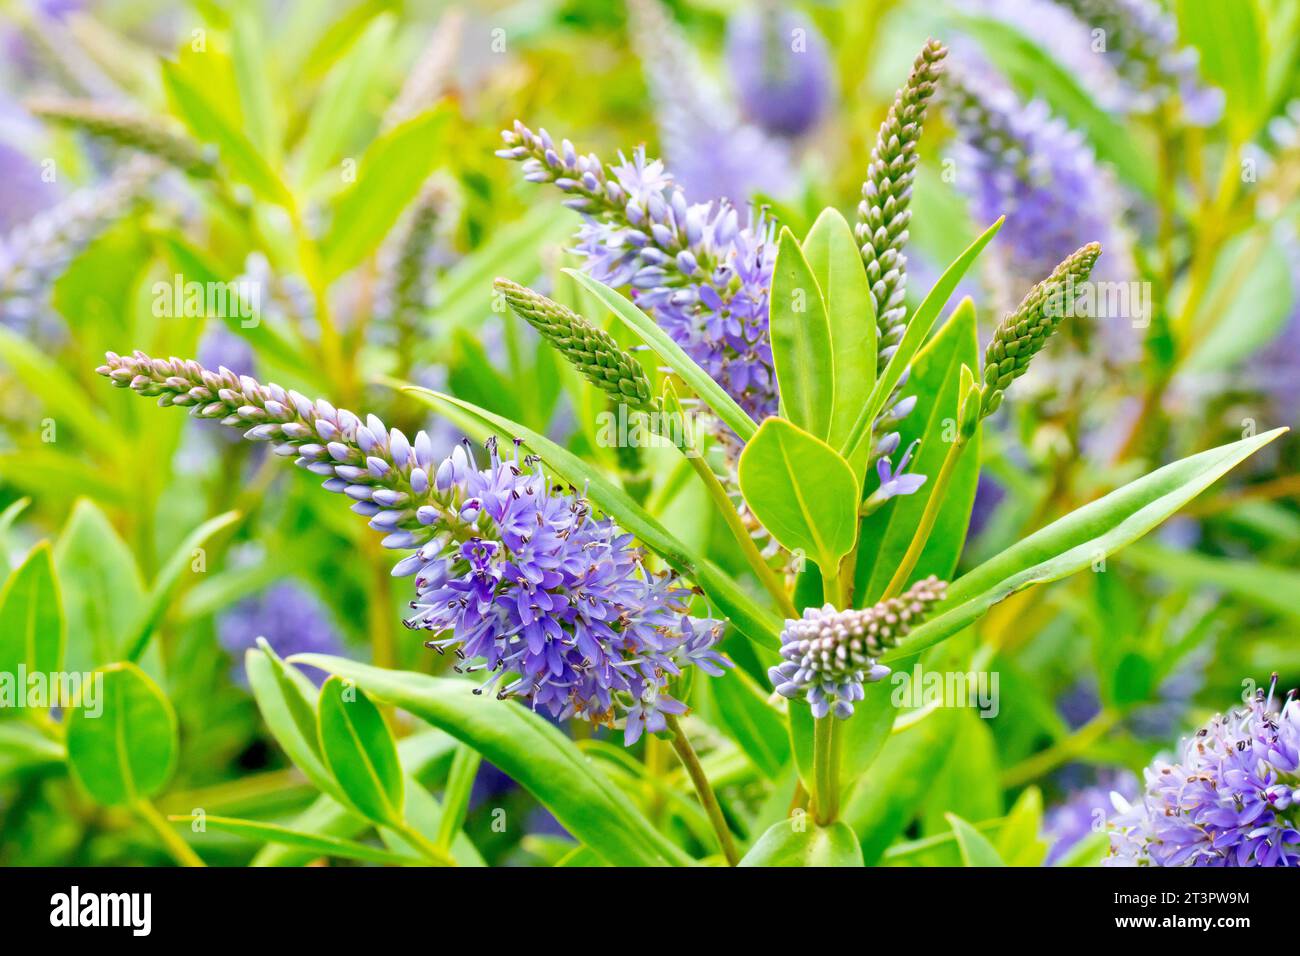 Hebe, a shrub of the veronica family, close up showing a spike of the lilac flowers of this particular cultivar along with the leaves and flowerbuds. Stock Photo